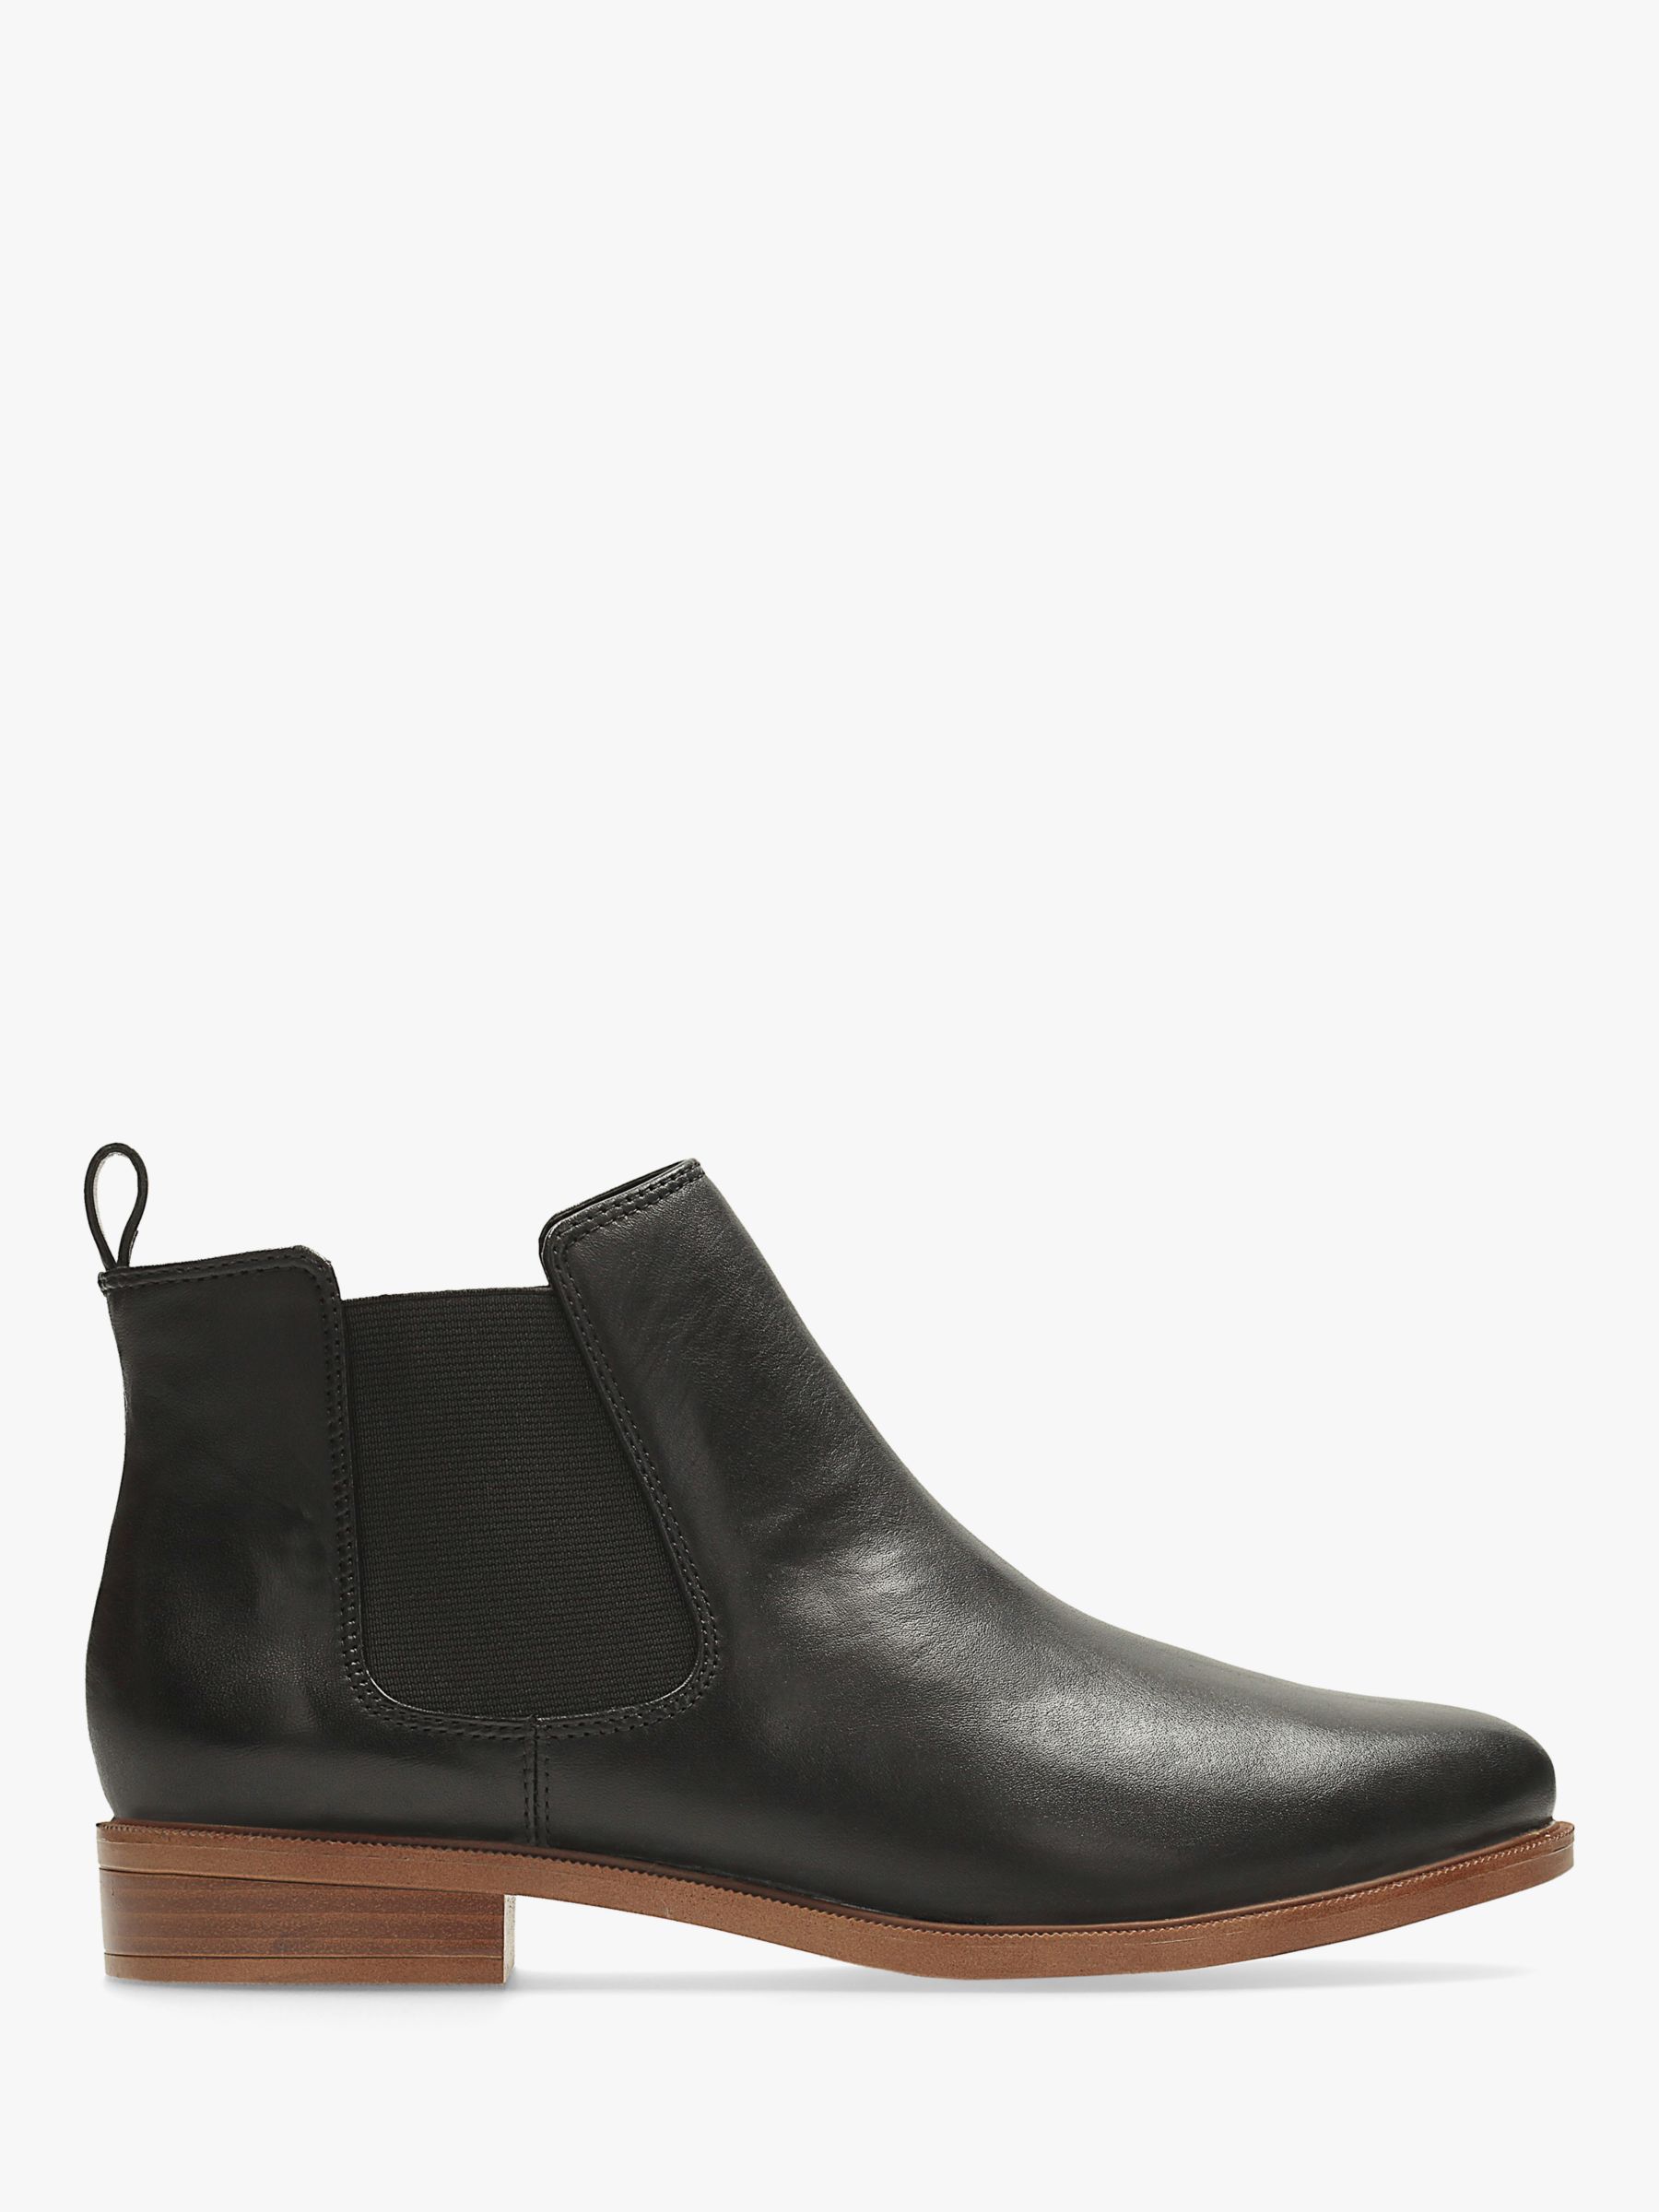 clarks womens leather ankle boots